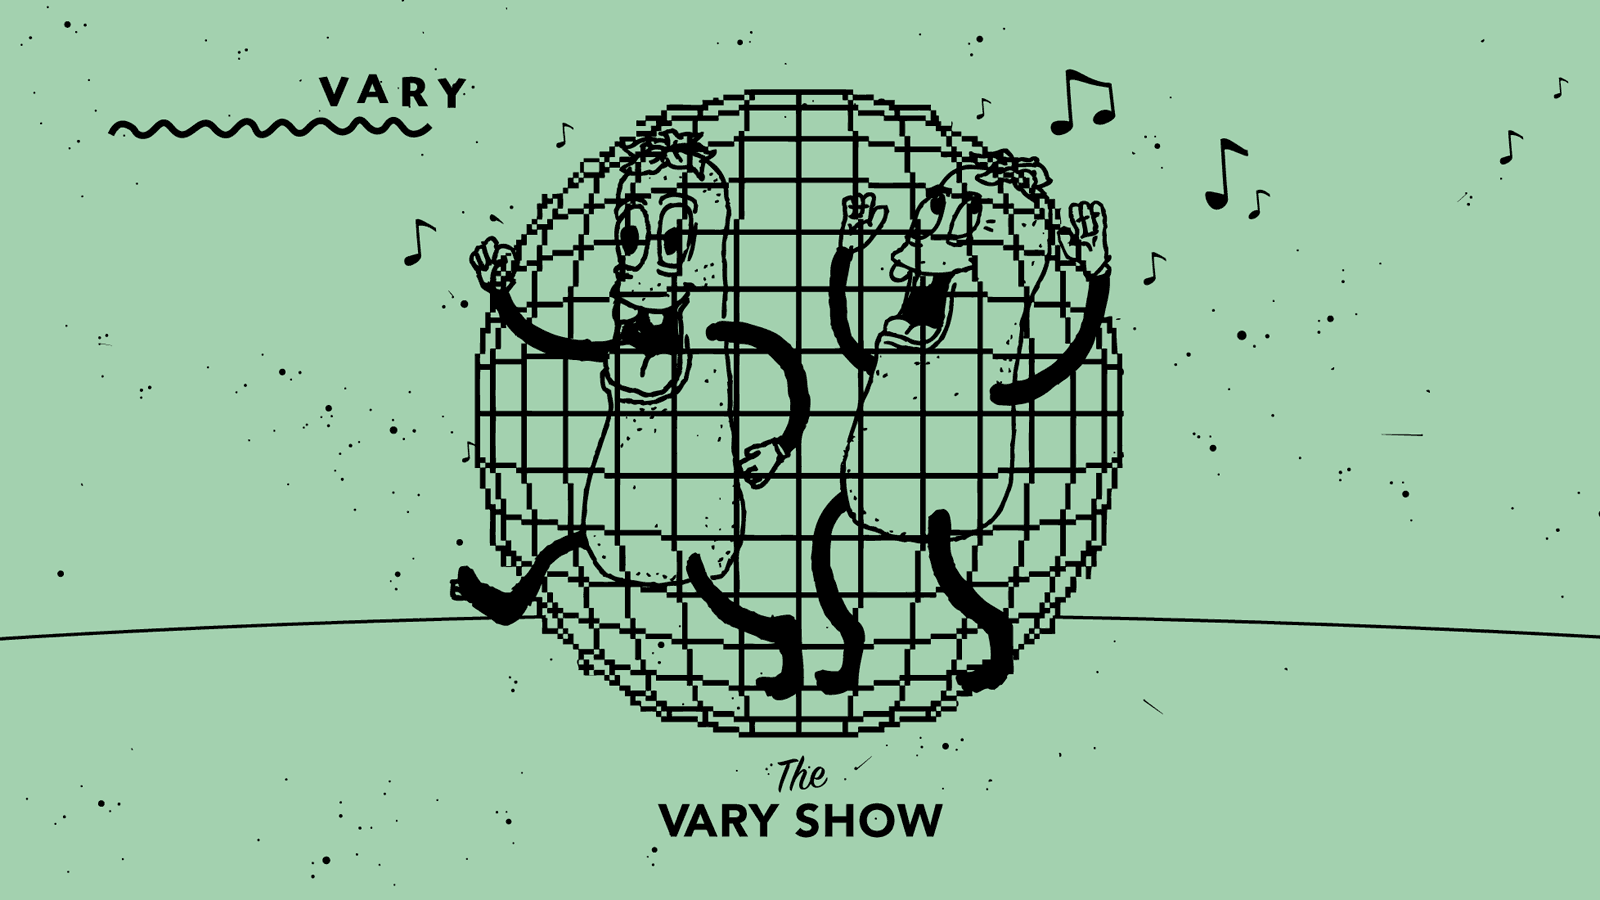 The VARY Show